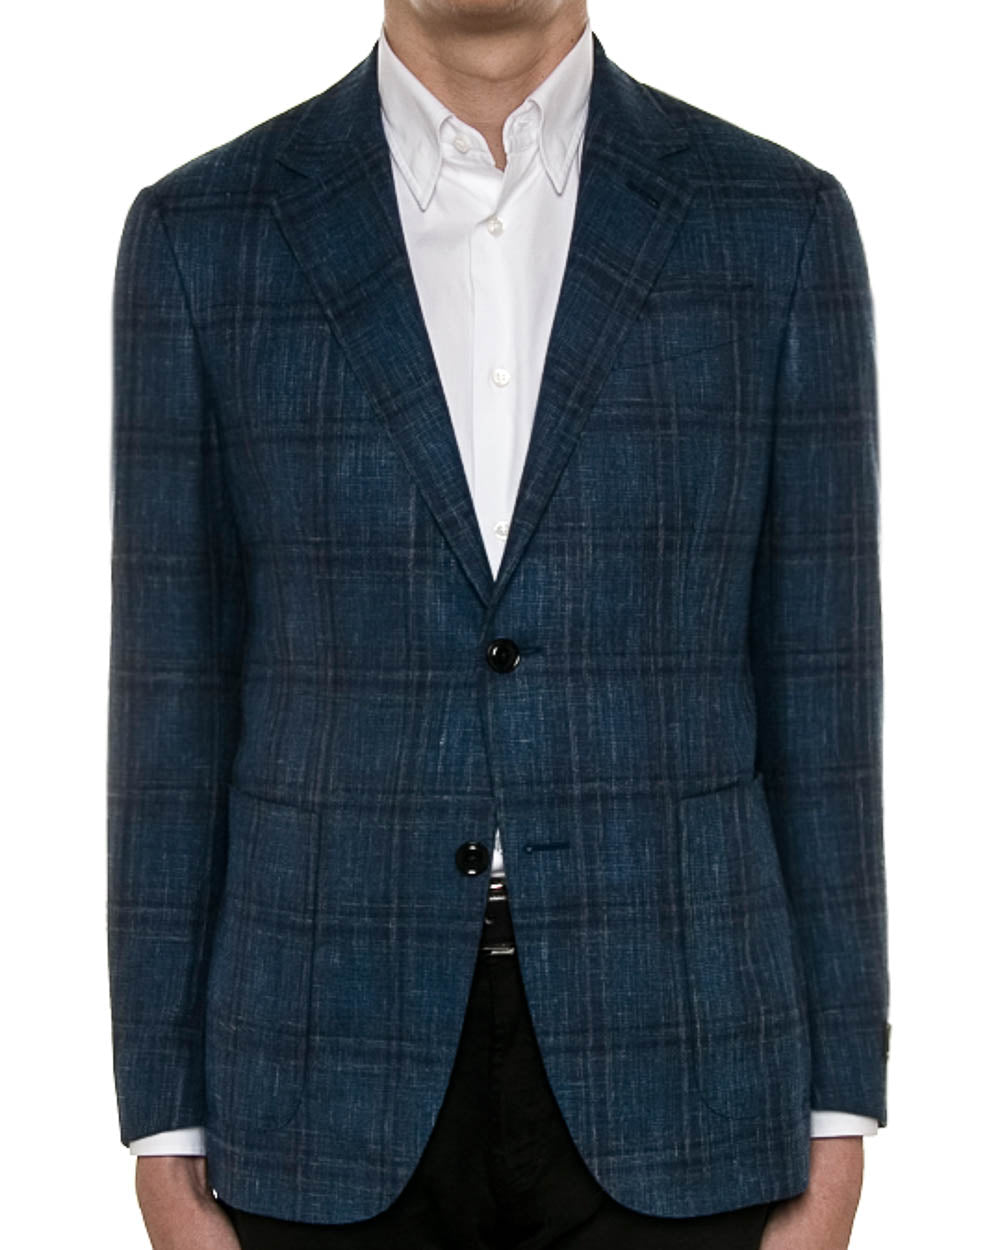 Navy Blue Mix with Teal Windowpane Sportcoat